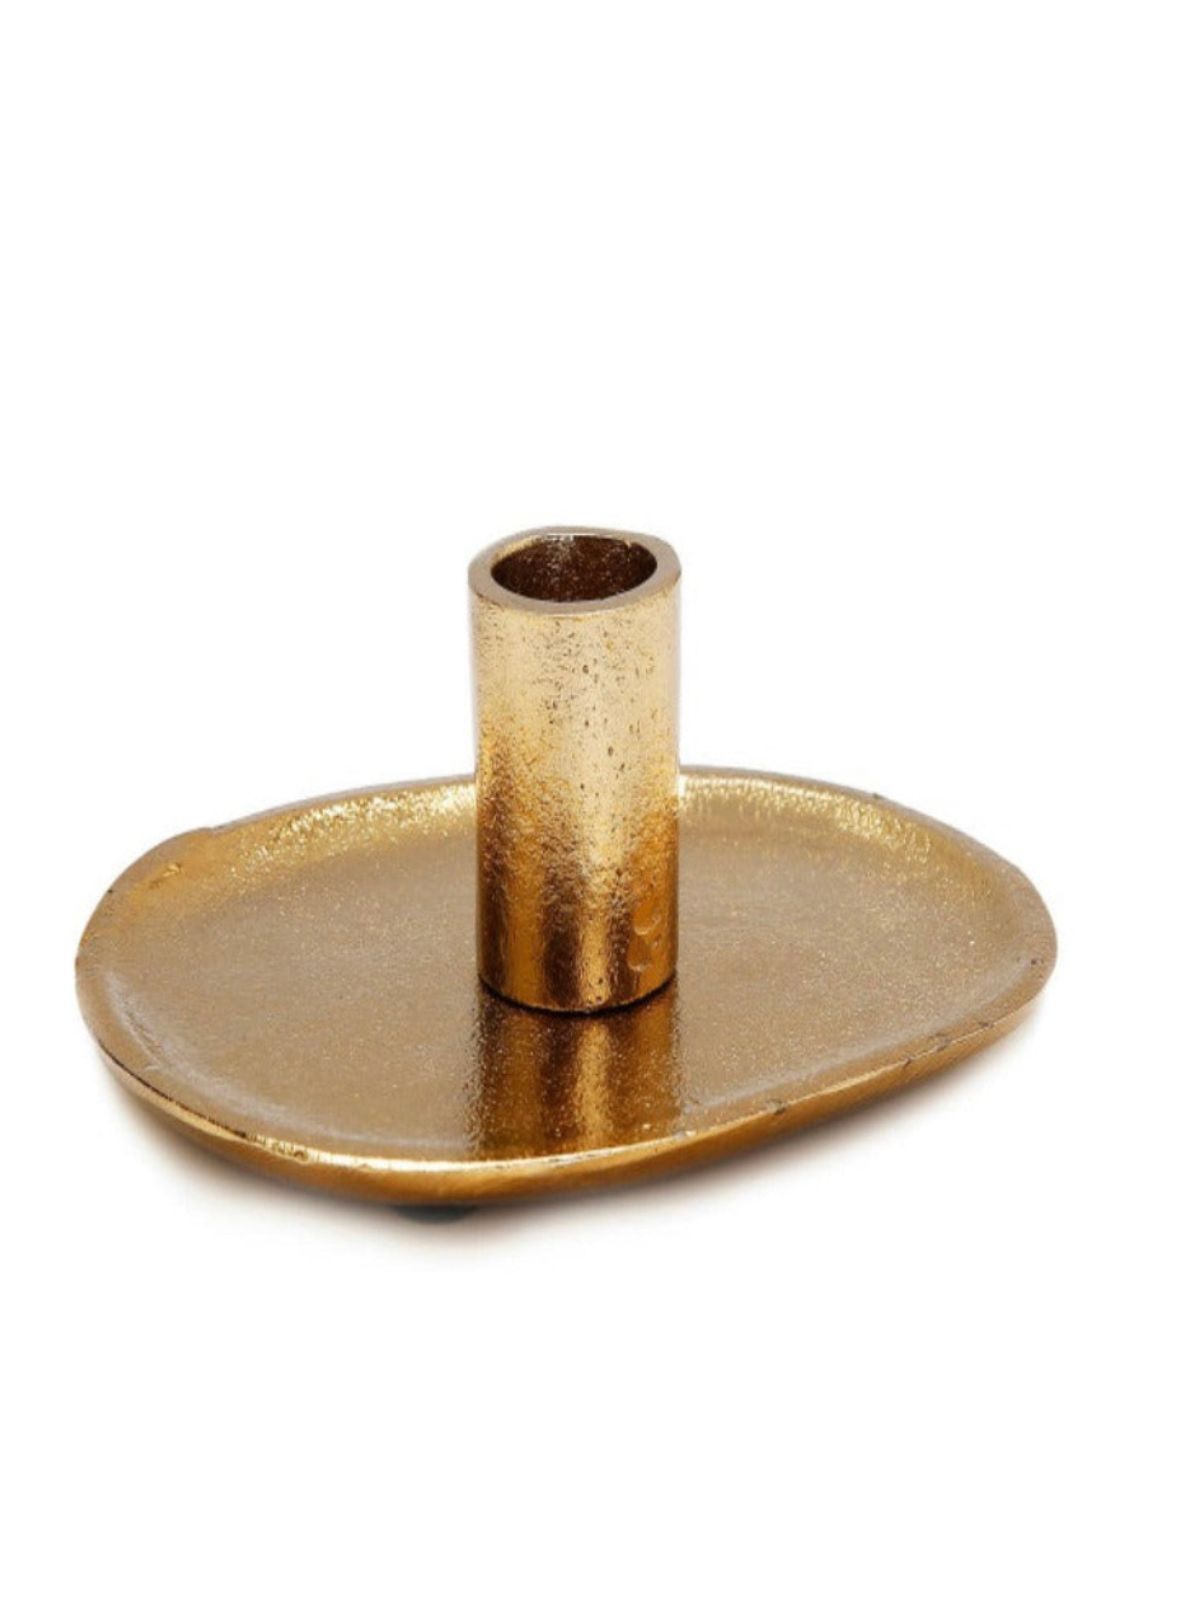 This Beautiful candle holder is exactly what you have been looking for to complete your holiday tables, the brass gold finish matches well in any home decor!